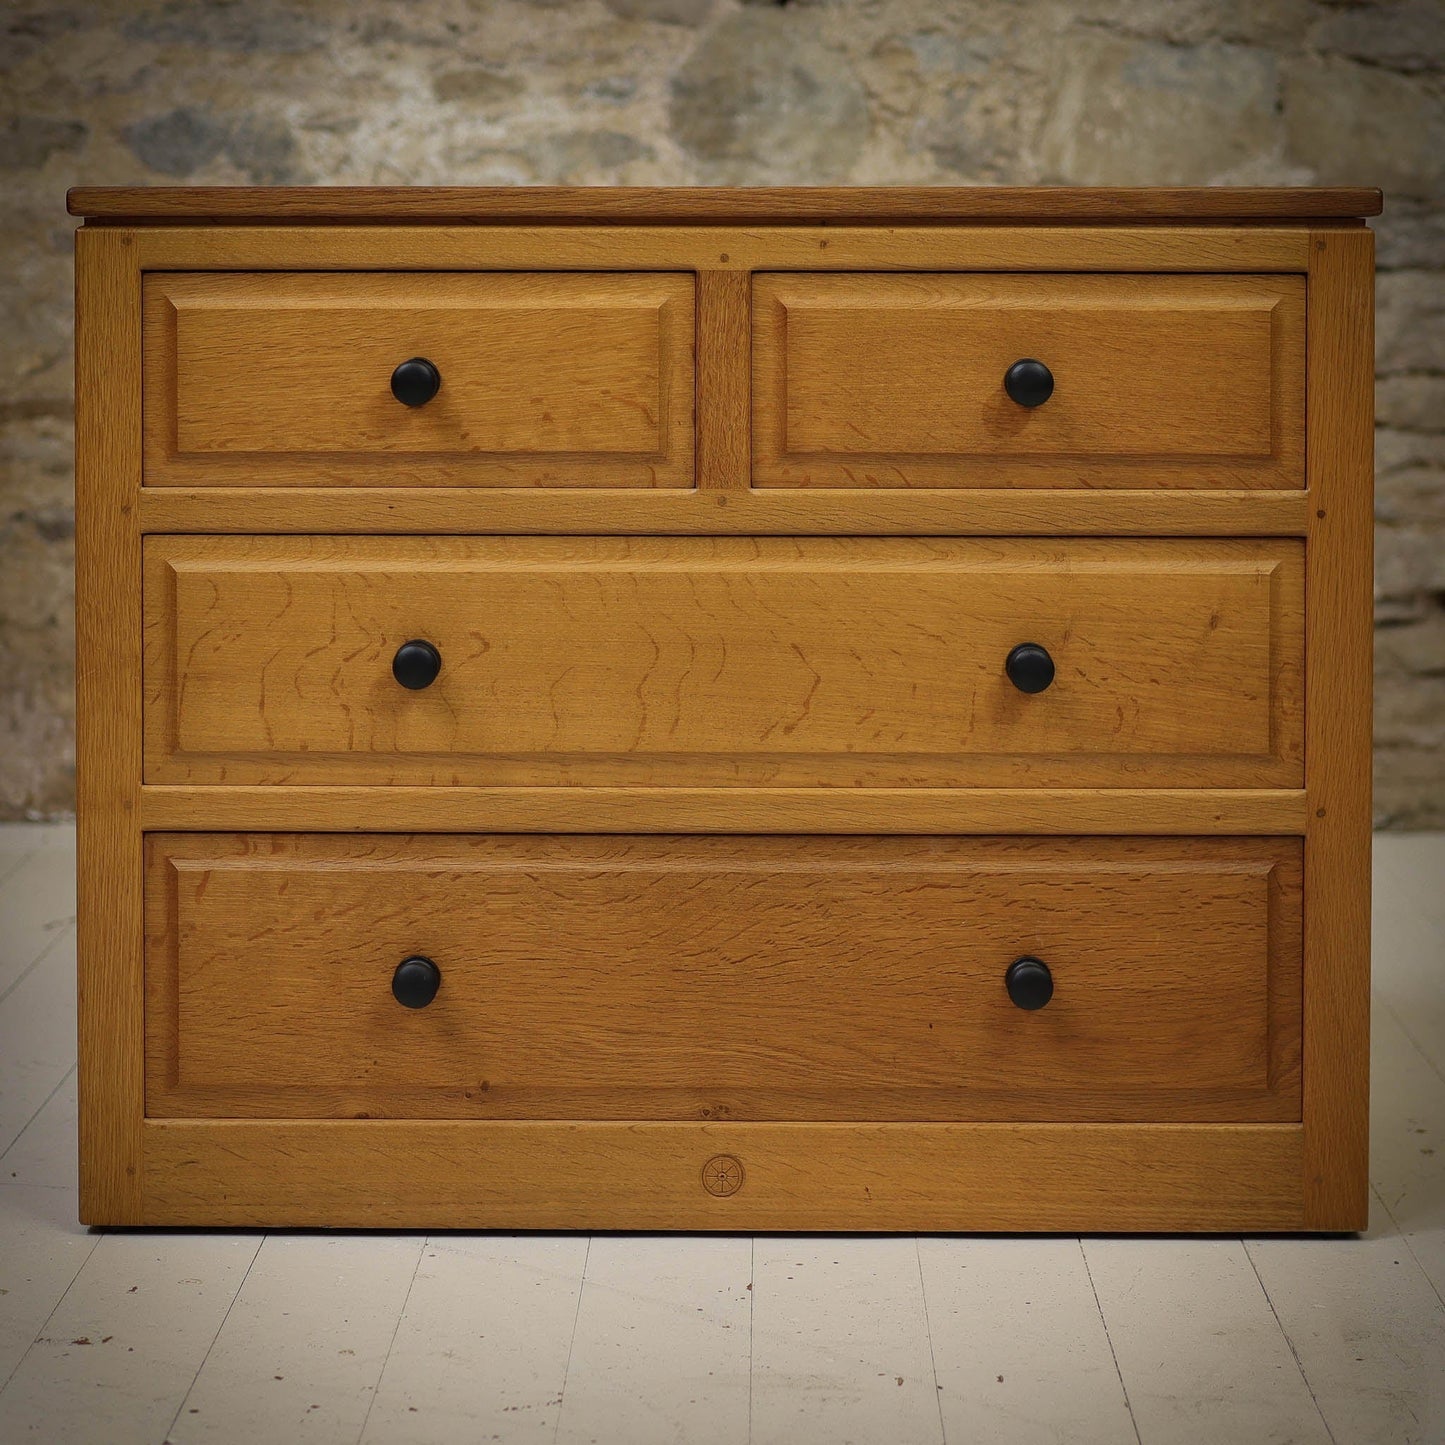 Phil Langstaff Arts & Crafts Yorkshire School English Oak Chest of Drawers (a)